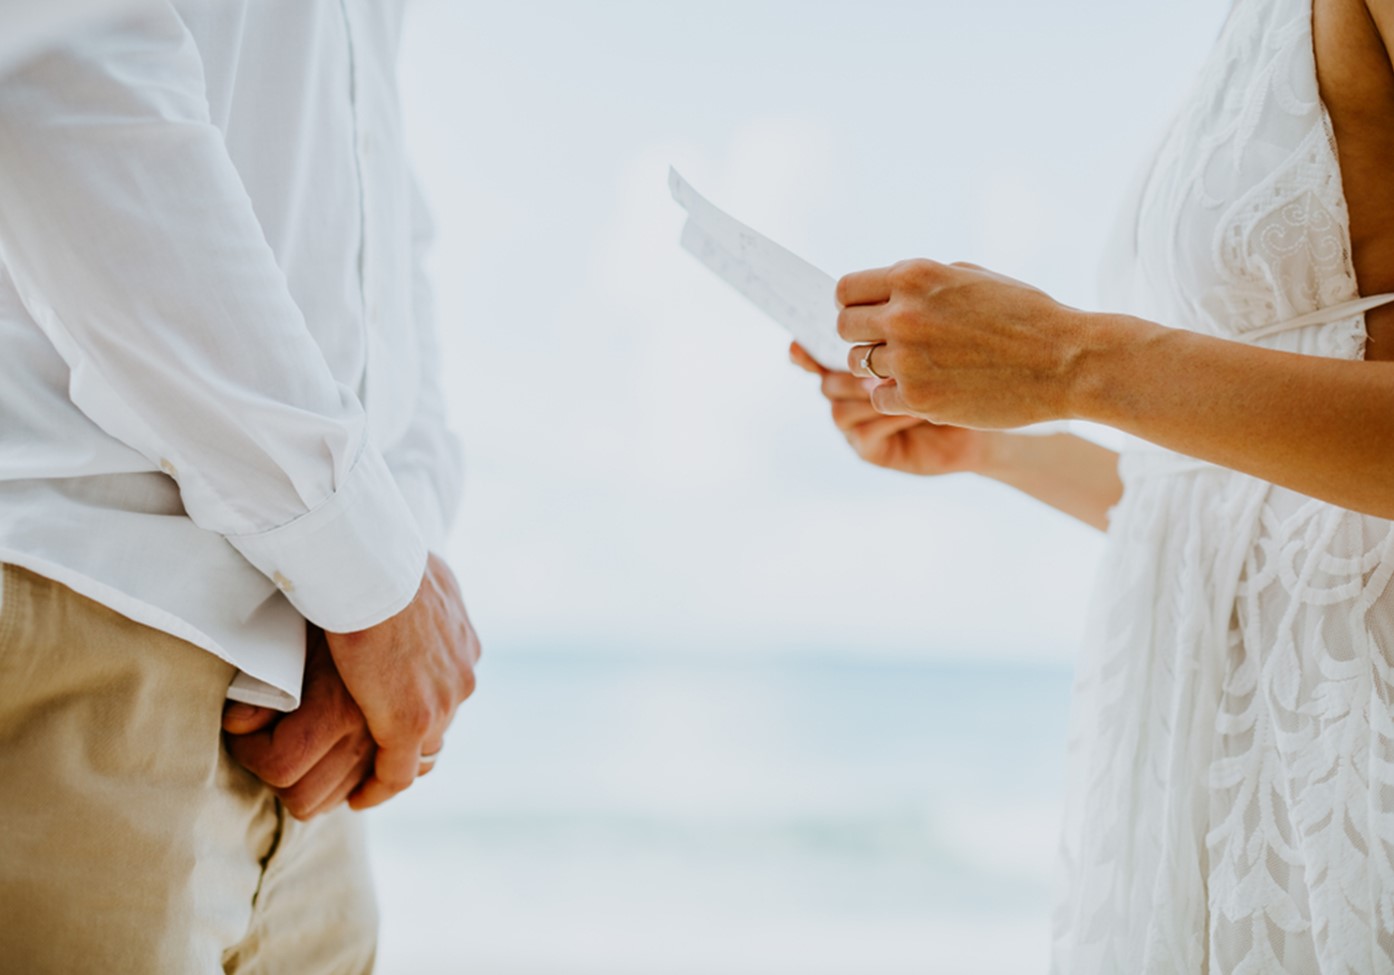 8 Benefits of Renewing Your Vows